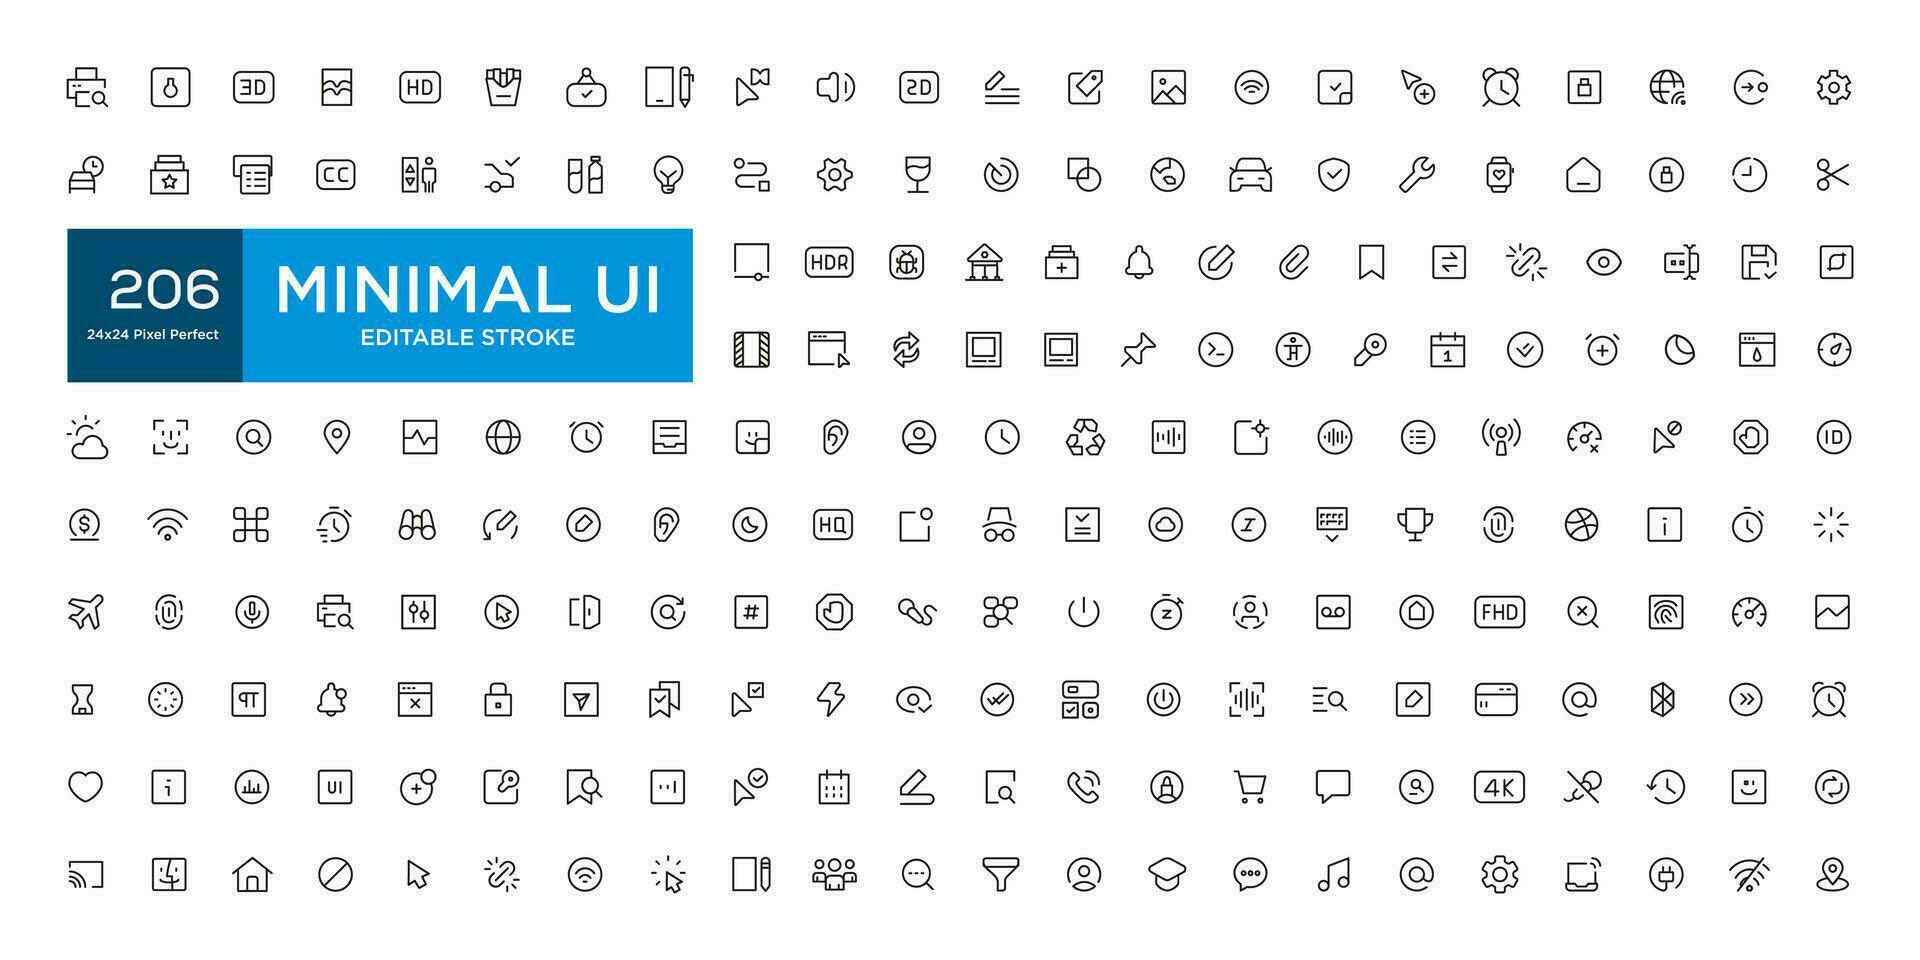 Mega set of ui ux icons, user interface icon set collection vector